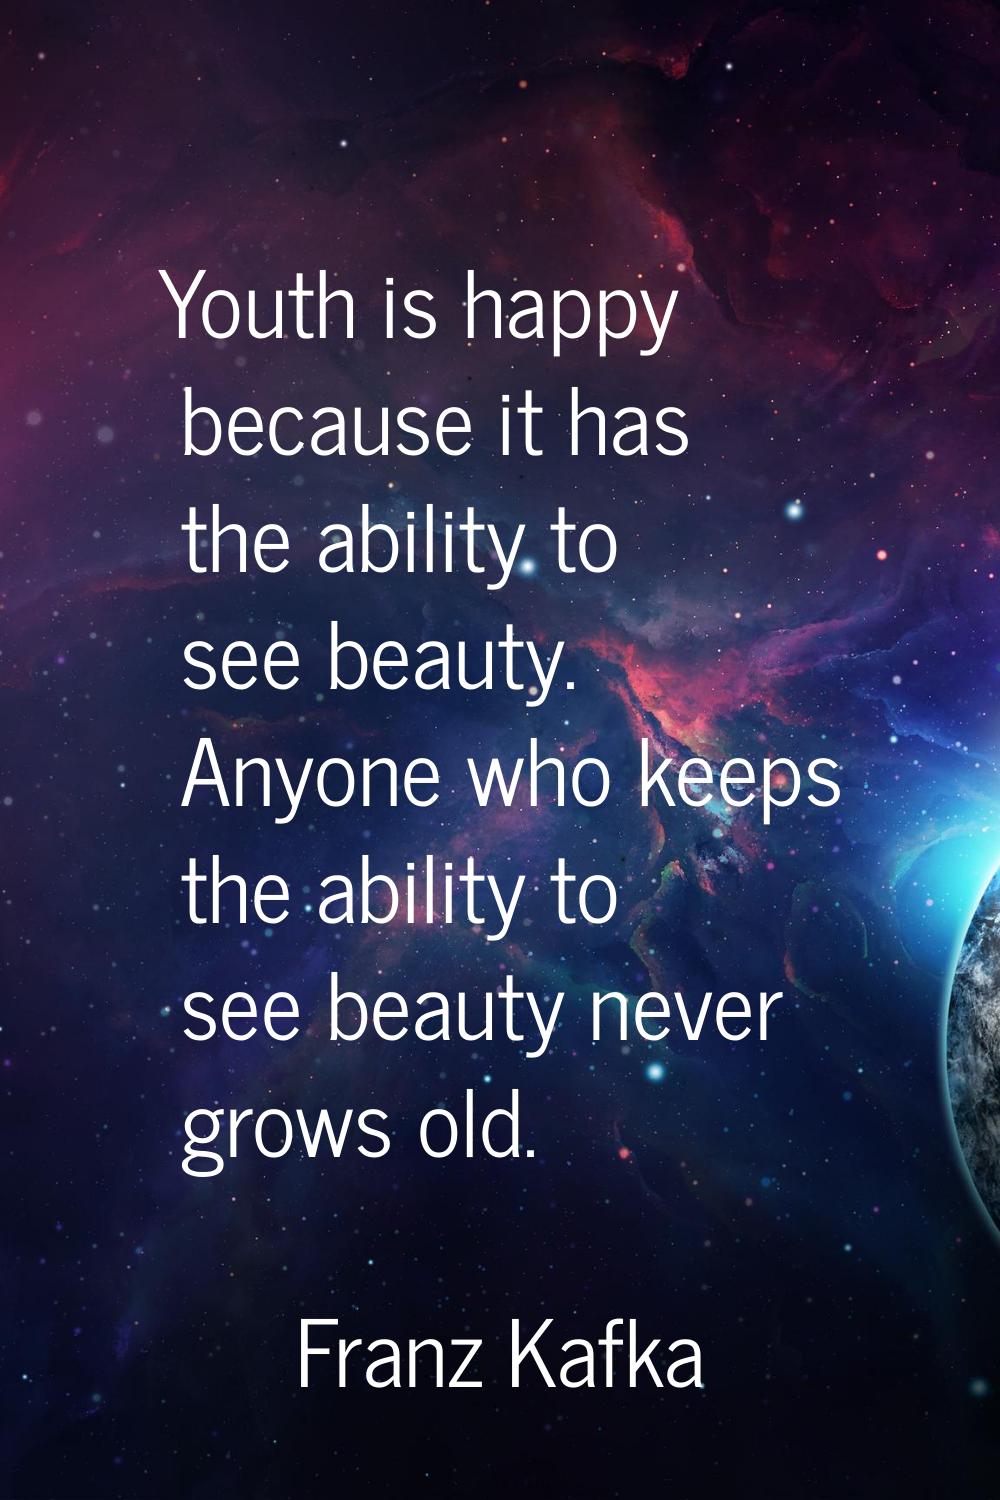 Youth is happy because it has the ability to see beauty. Anyone who keeps the ability to see beauty